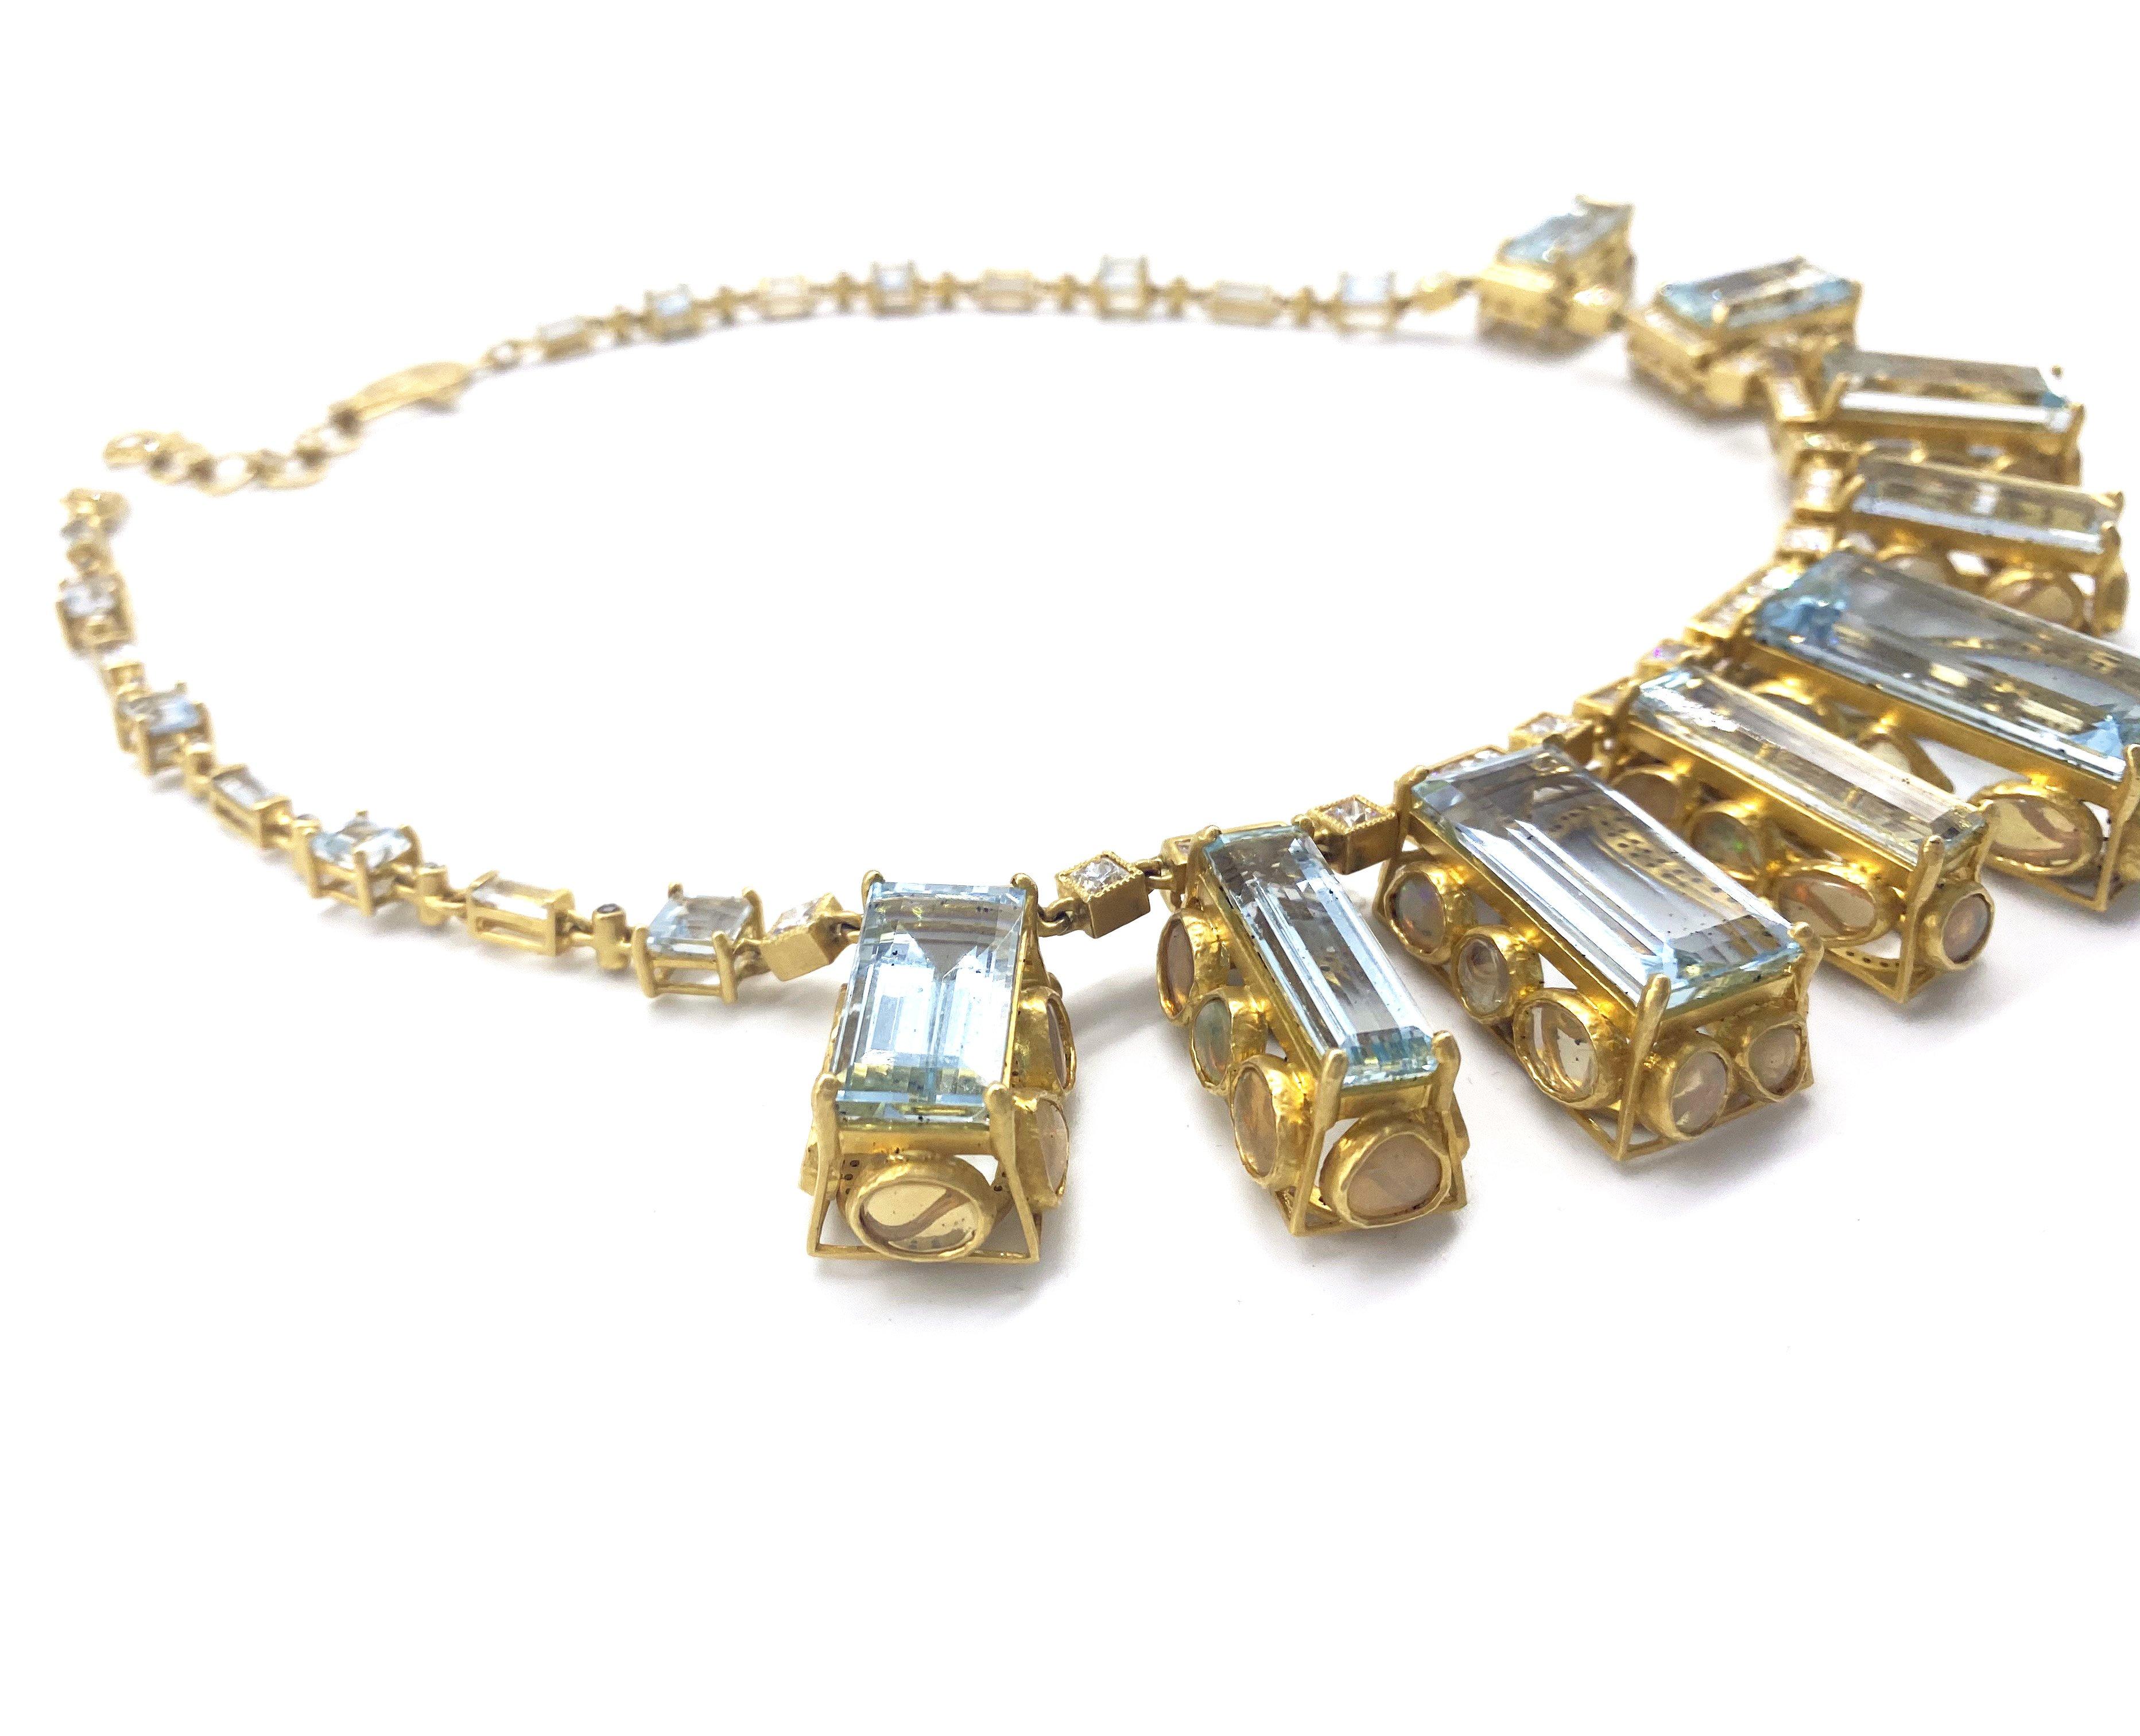 Affinity Necklace set in 20K Yellow Gold. 126.85cts Aquamarine, and 15.49cts Opals, 10.17cts Diamonds. Necklace measures at 16inches with a 2inch extender. 

15.49cts Opals
126.85cts Aquamarine 
10.17cts Diamonds 
16 Inches with 2-inch extender
20K